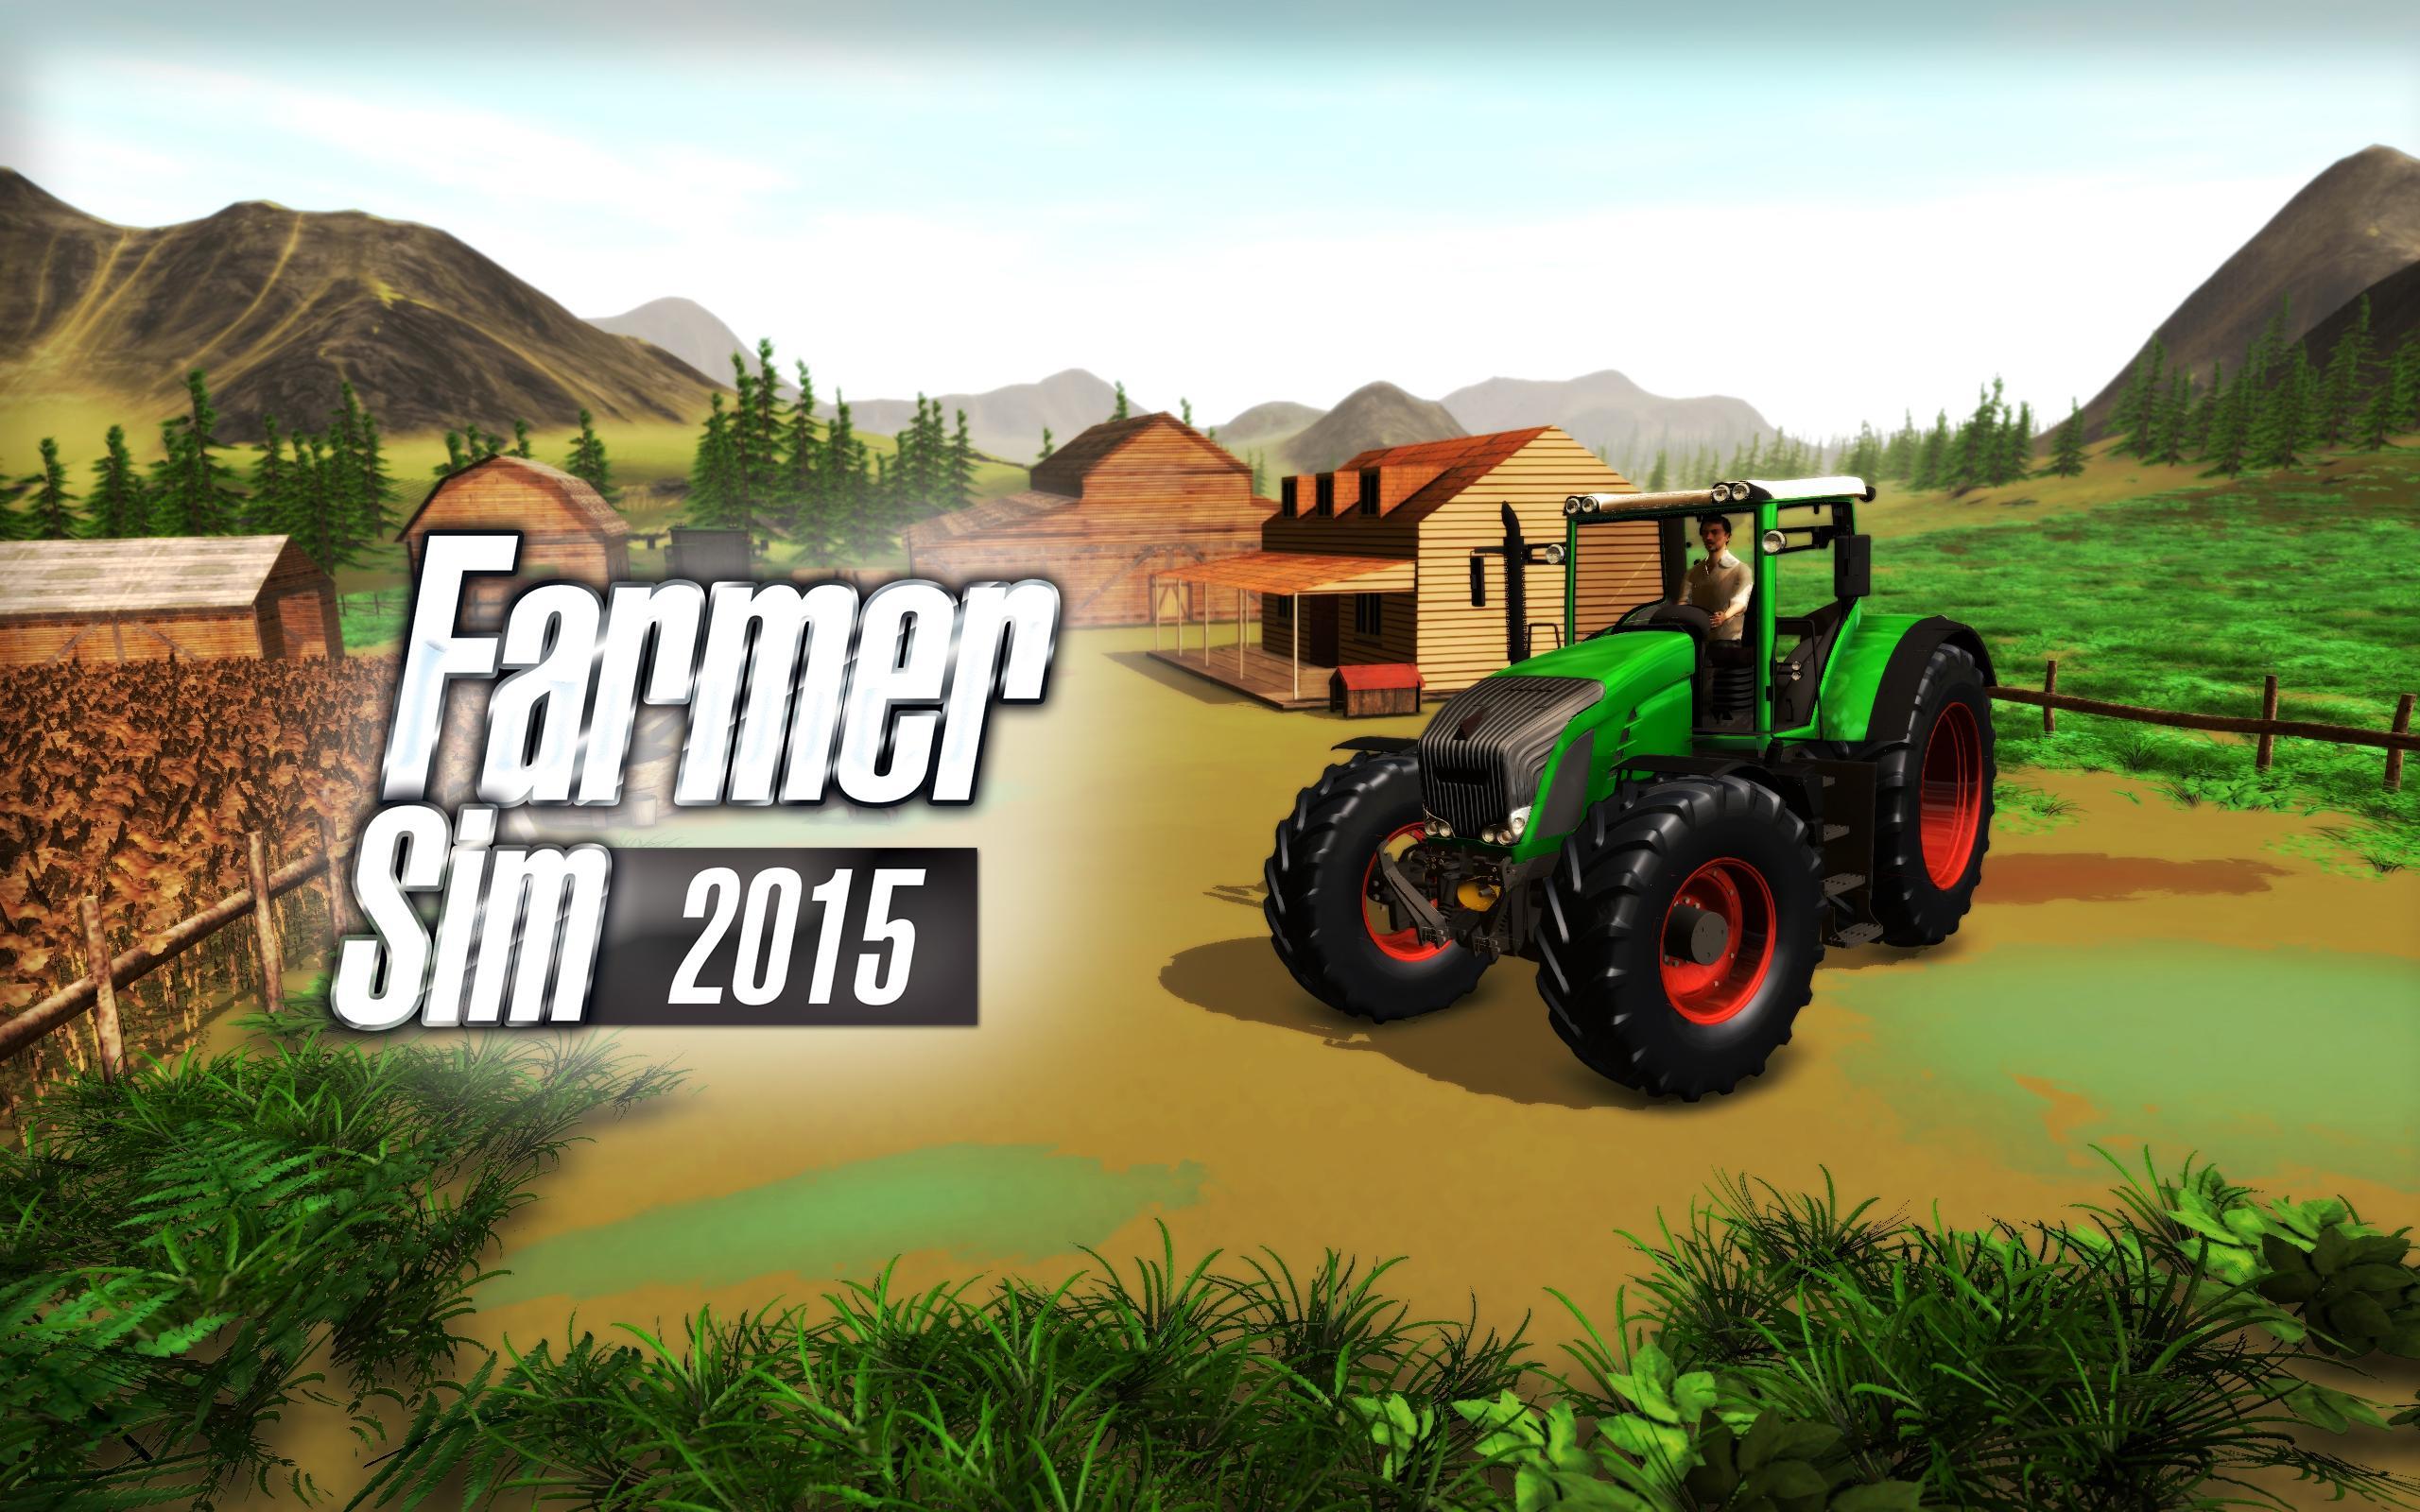 Farmer Sim 2015 for Android - APK Download